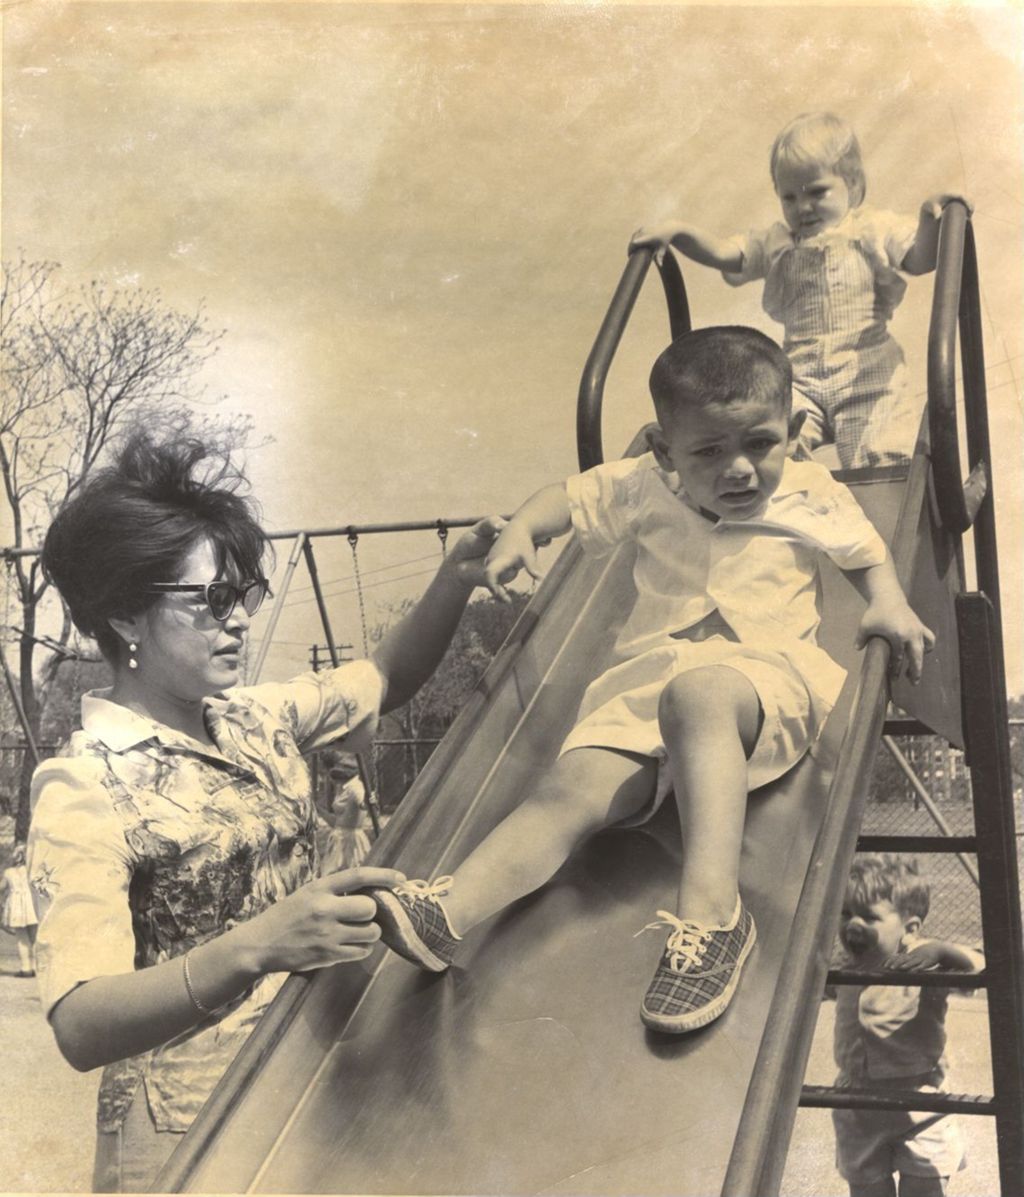 Miniature of Children playing on a slide with a woman assisting